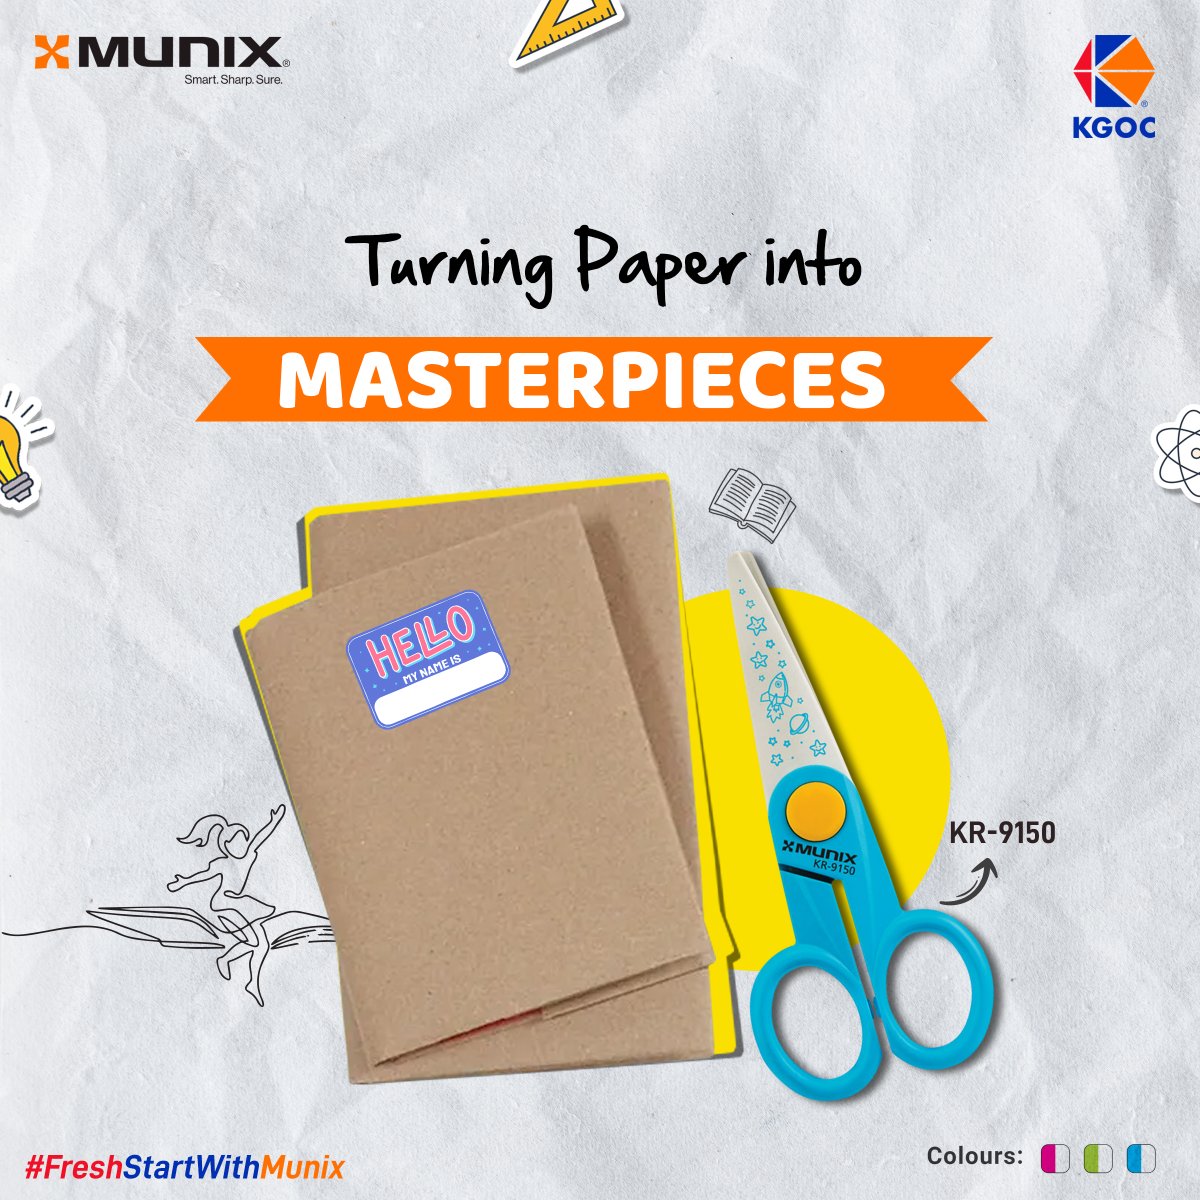 From doodles to designs, unleash your imagination and craft your masterpiece today. 🖼️🚀 

#MunixMagic #CreativeJourney #ArtisticExpression #munix #kgoc